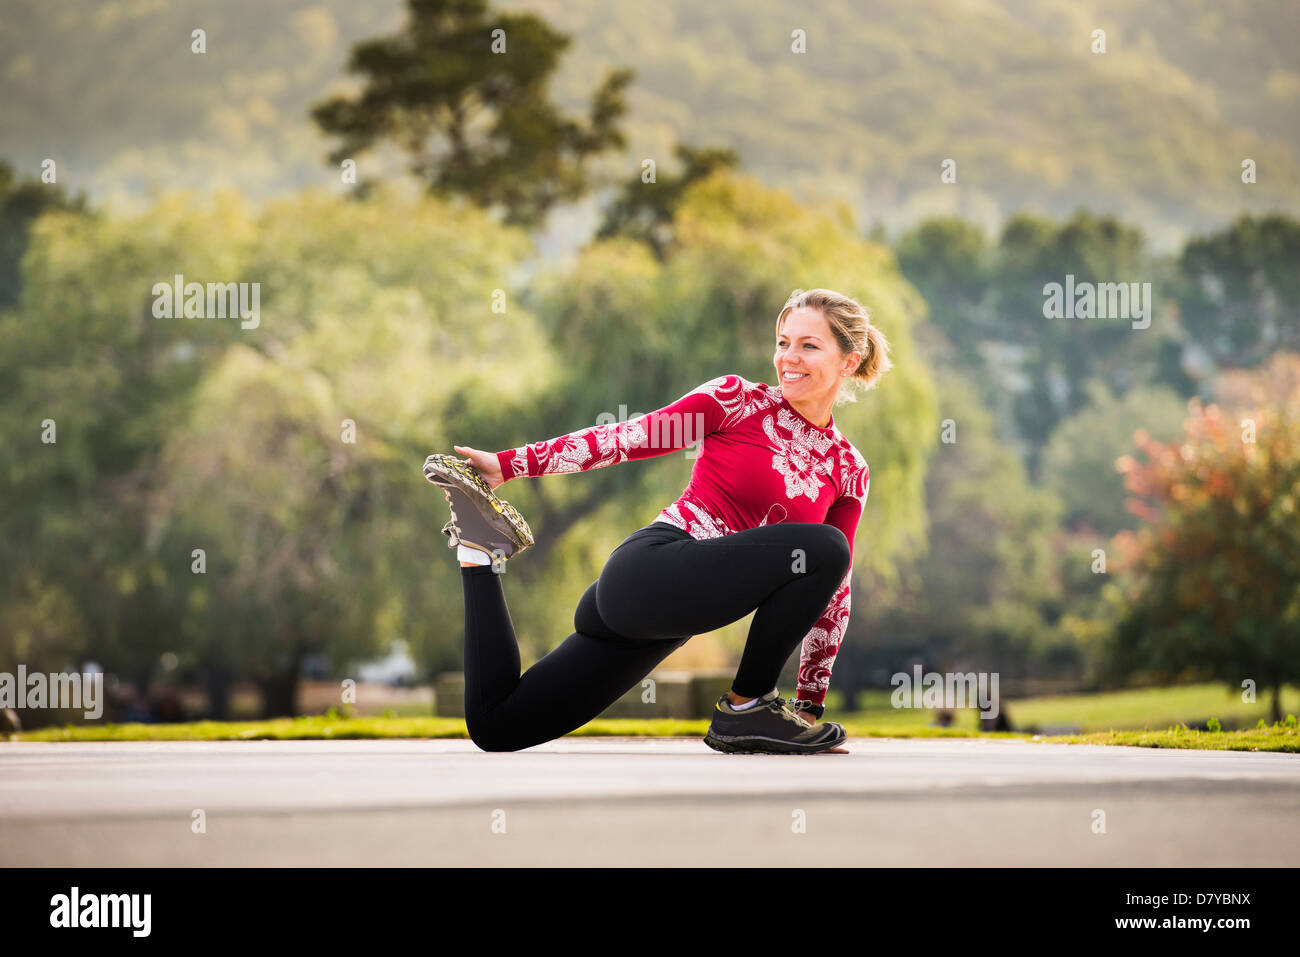 Caucasian runner stretching in park Banque D'Images